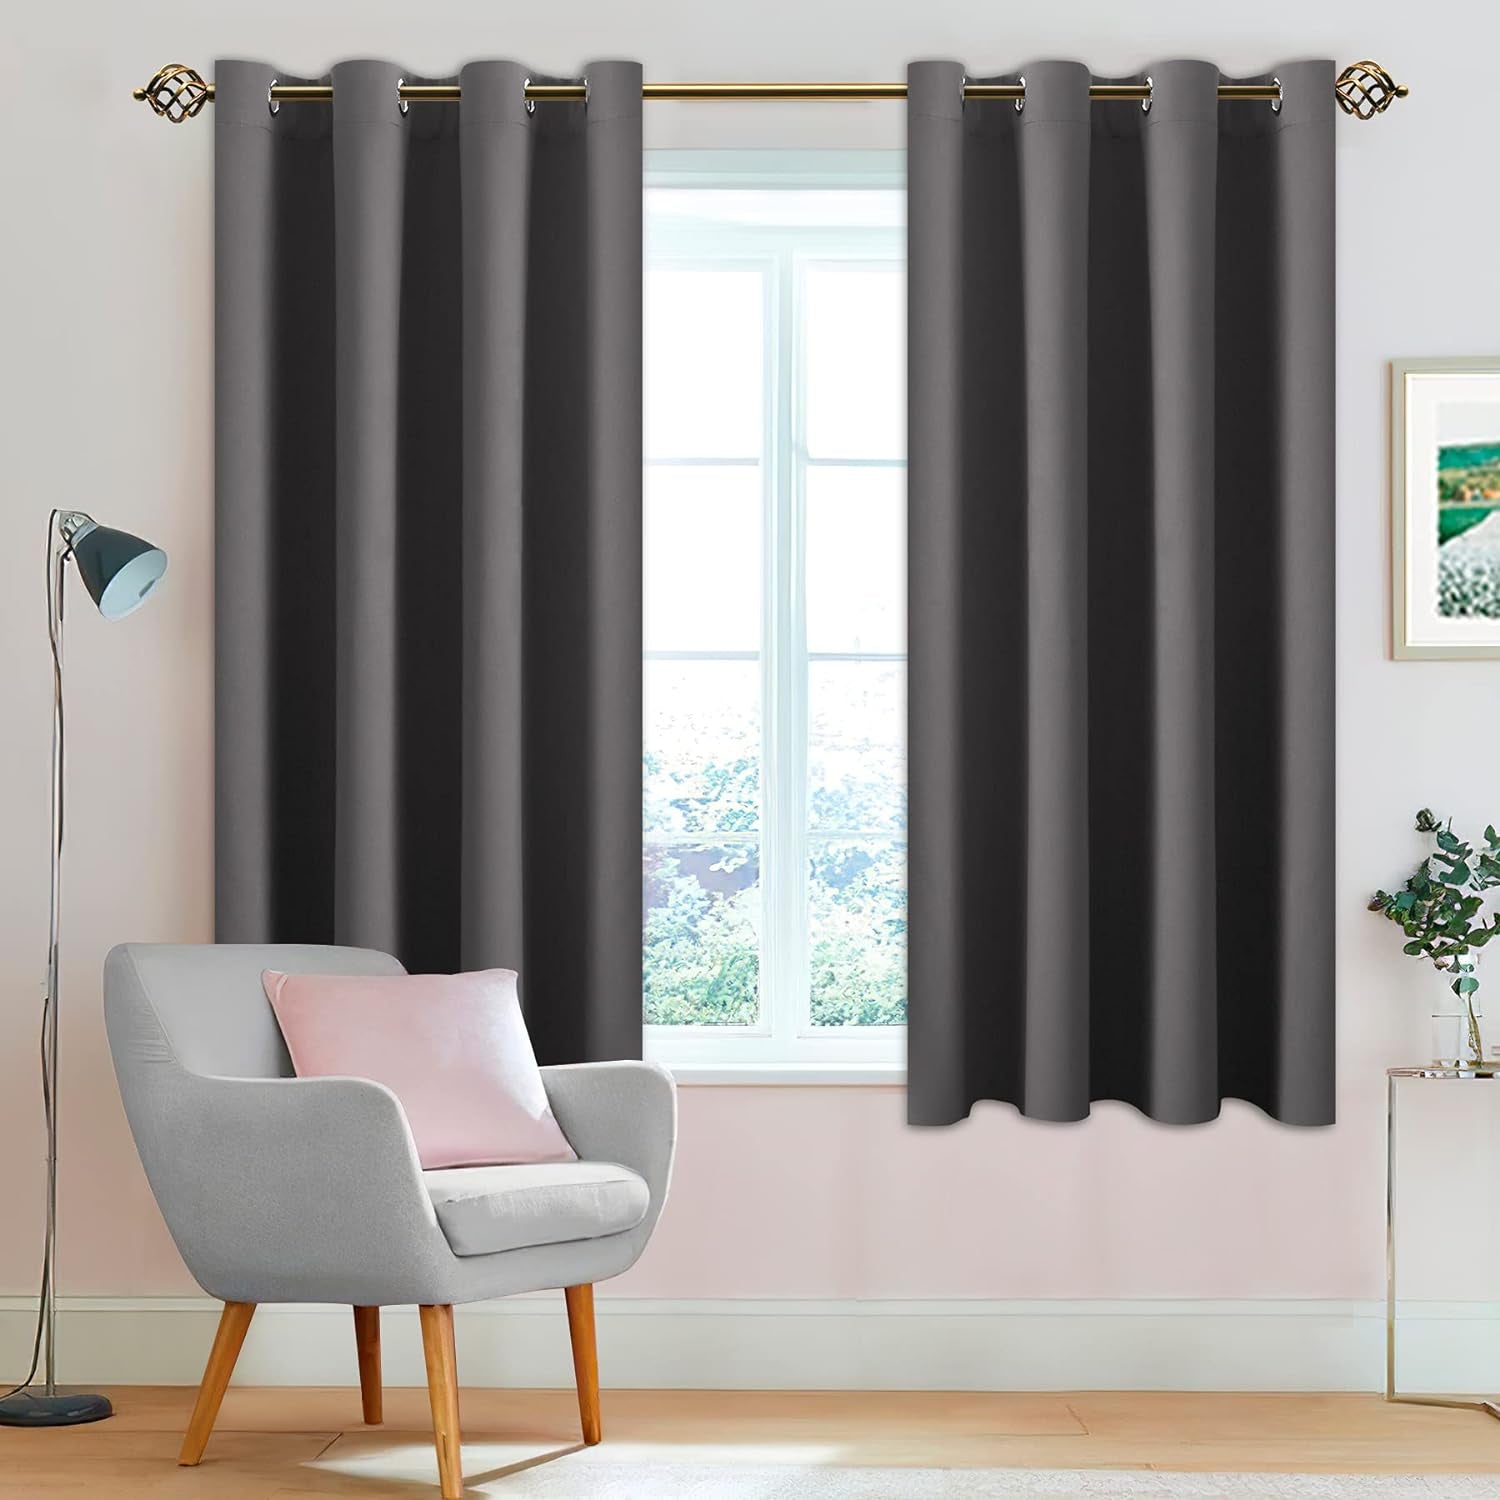 LUSHLEAF Blackout Curtains for Bedroom, Solid Thermal Insulated with Grommet Noise Reduction Window Drapes, Room Darkening Curtains for Living Room, 2 Panels, 52 X 63 Inch Grey  SHEEROOM   